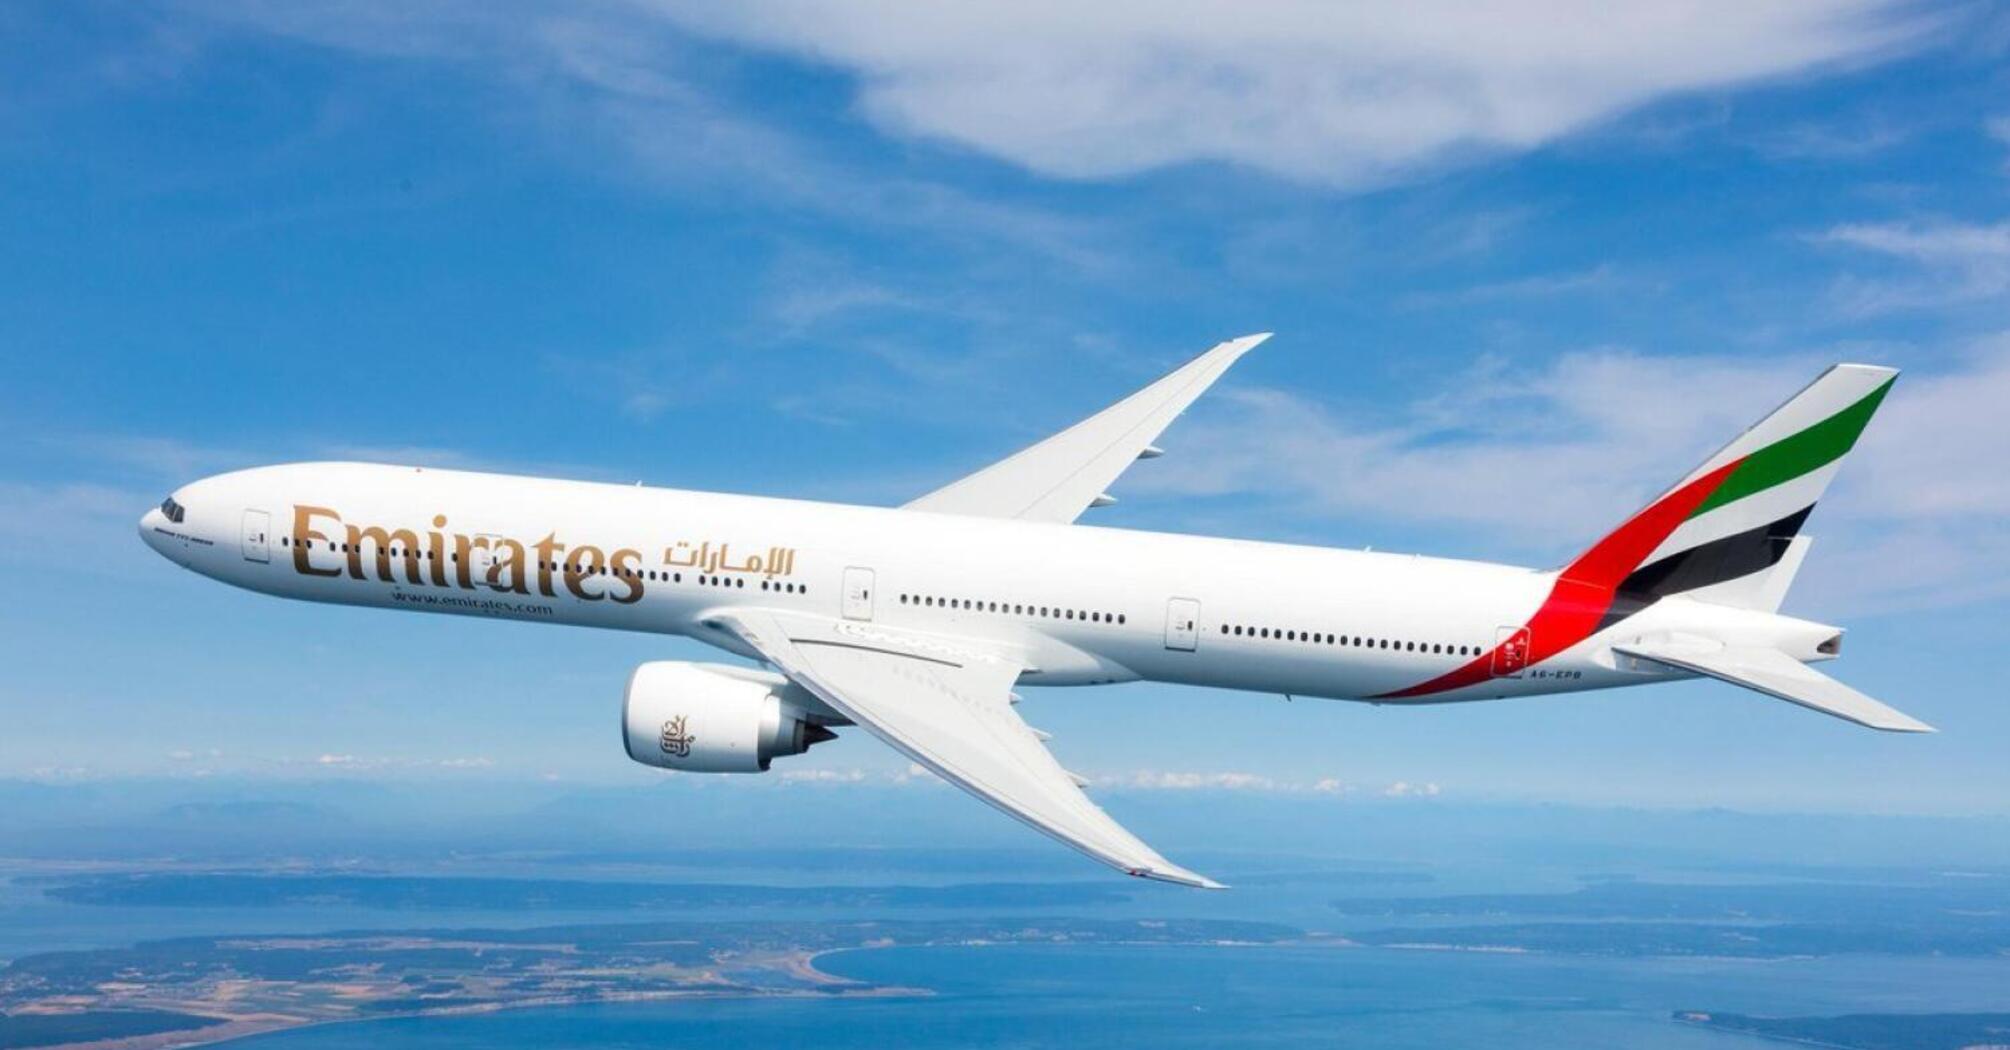 Emirates airline is increasing the number of flights to Seoul with over 1000 additional seats per week